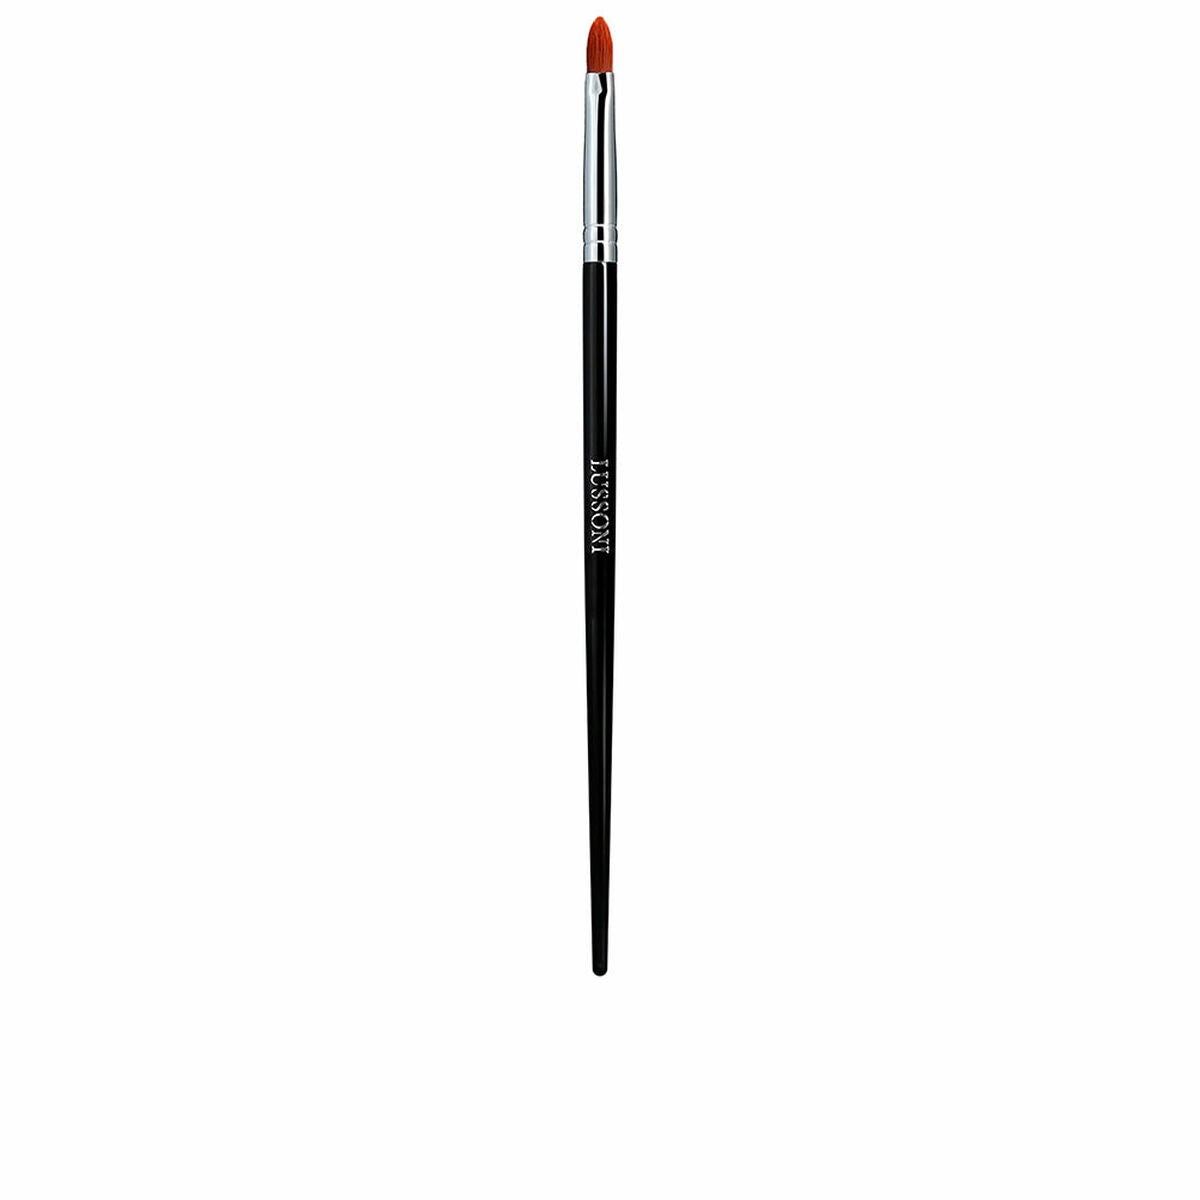 2 in 1 lip and eye liner Lussoni Lussoni Pro Conical (1 Unit) | Lussoni | Aylal Beauty